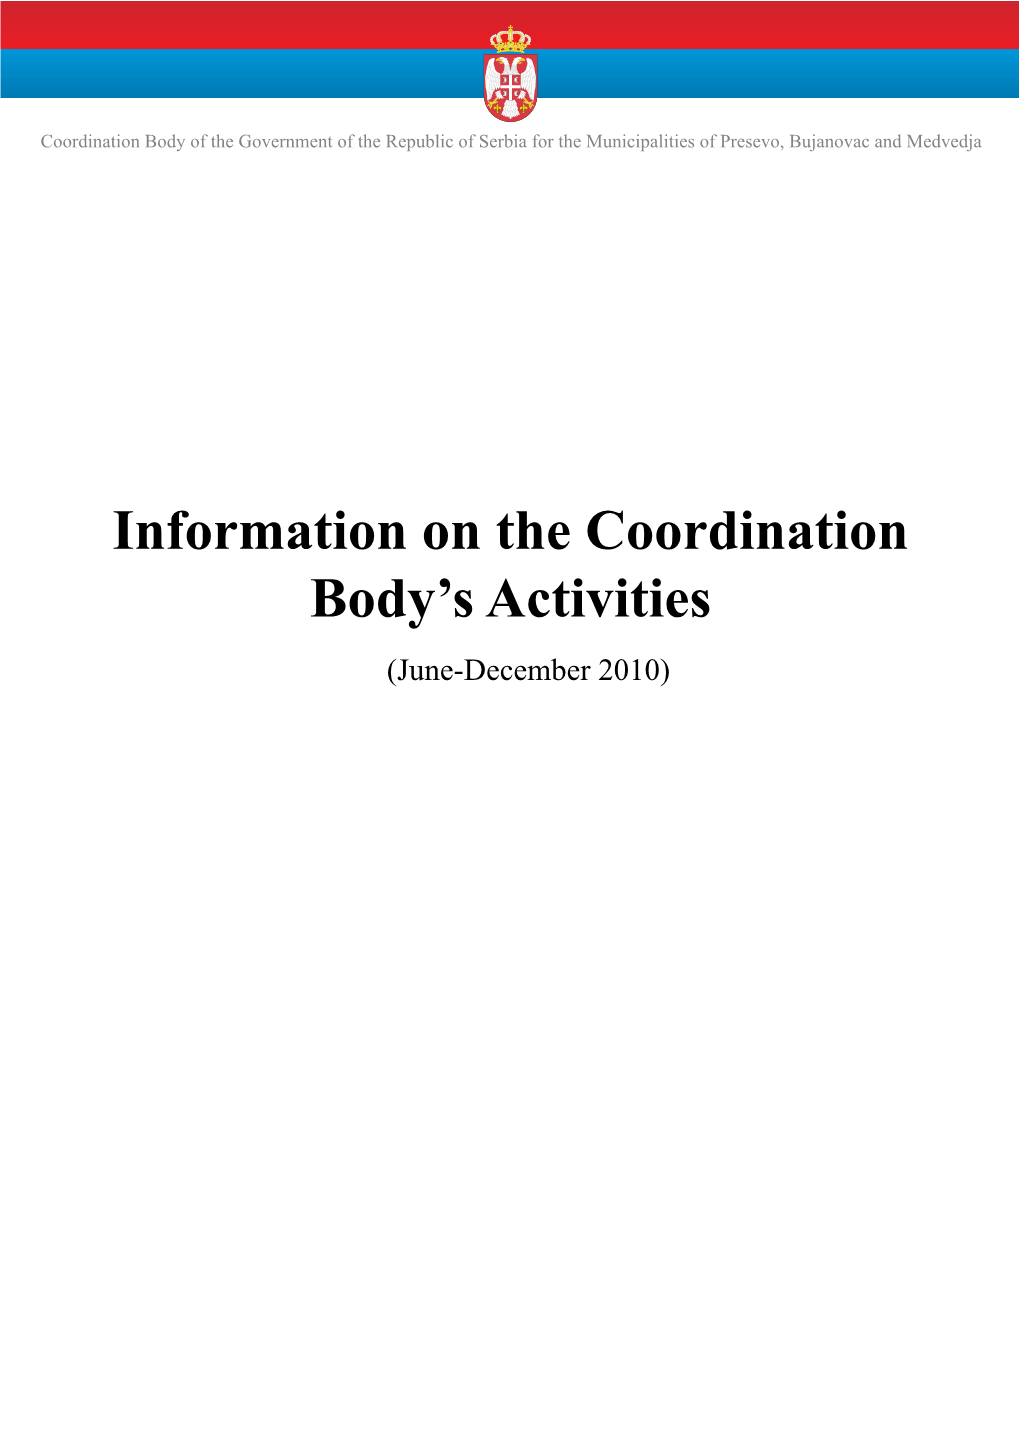 Information on the Coordination Body's Activities